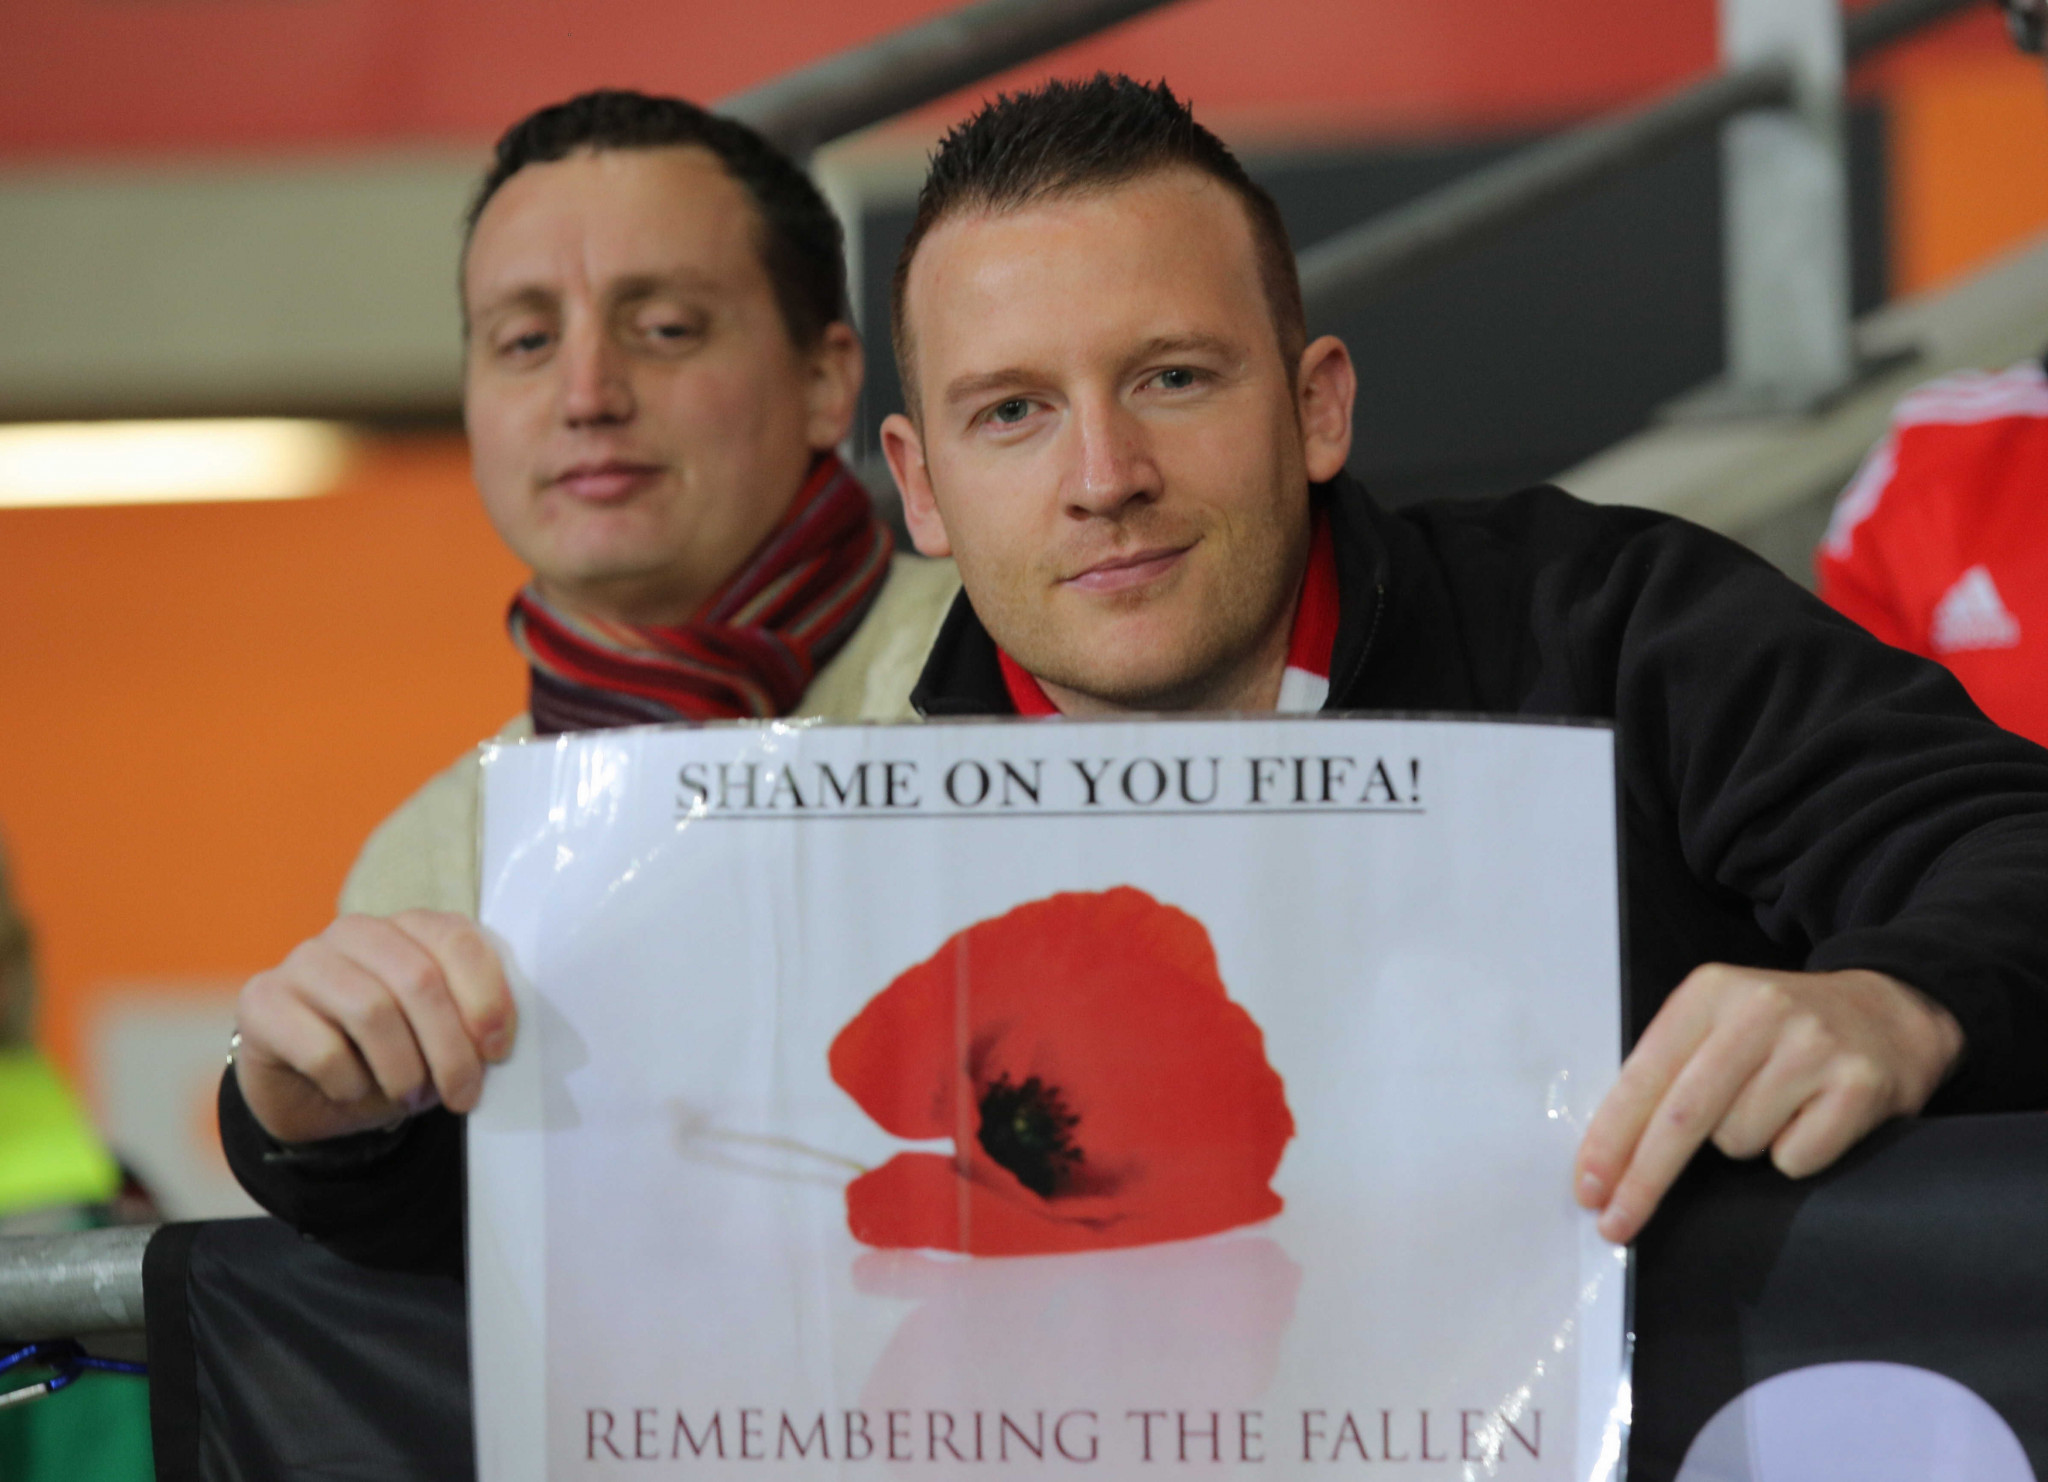 There was anger among British football fans at FIFA's claim the poppy was a political symbol ©Getty Images